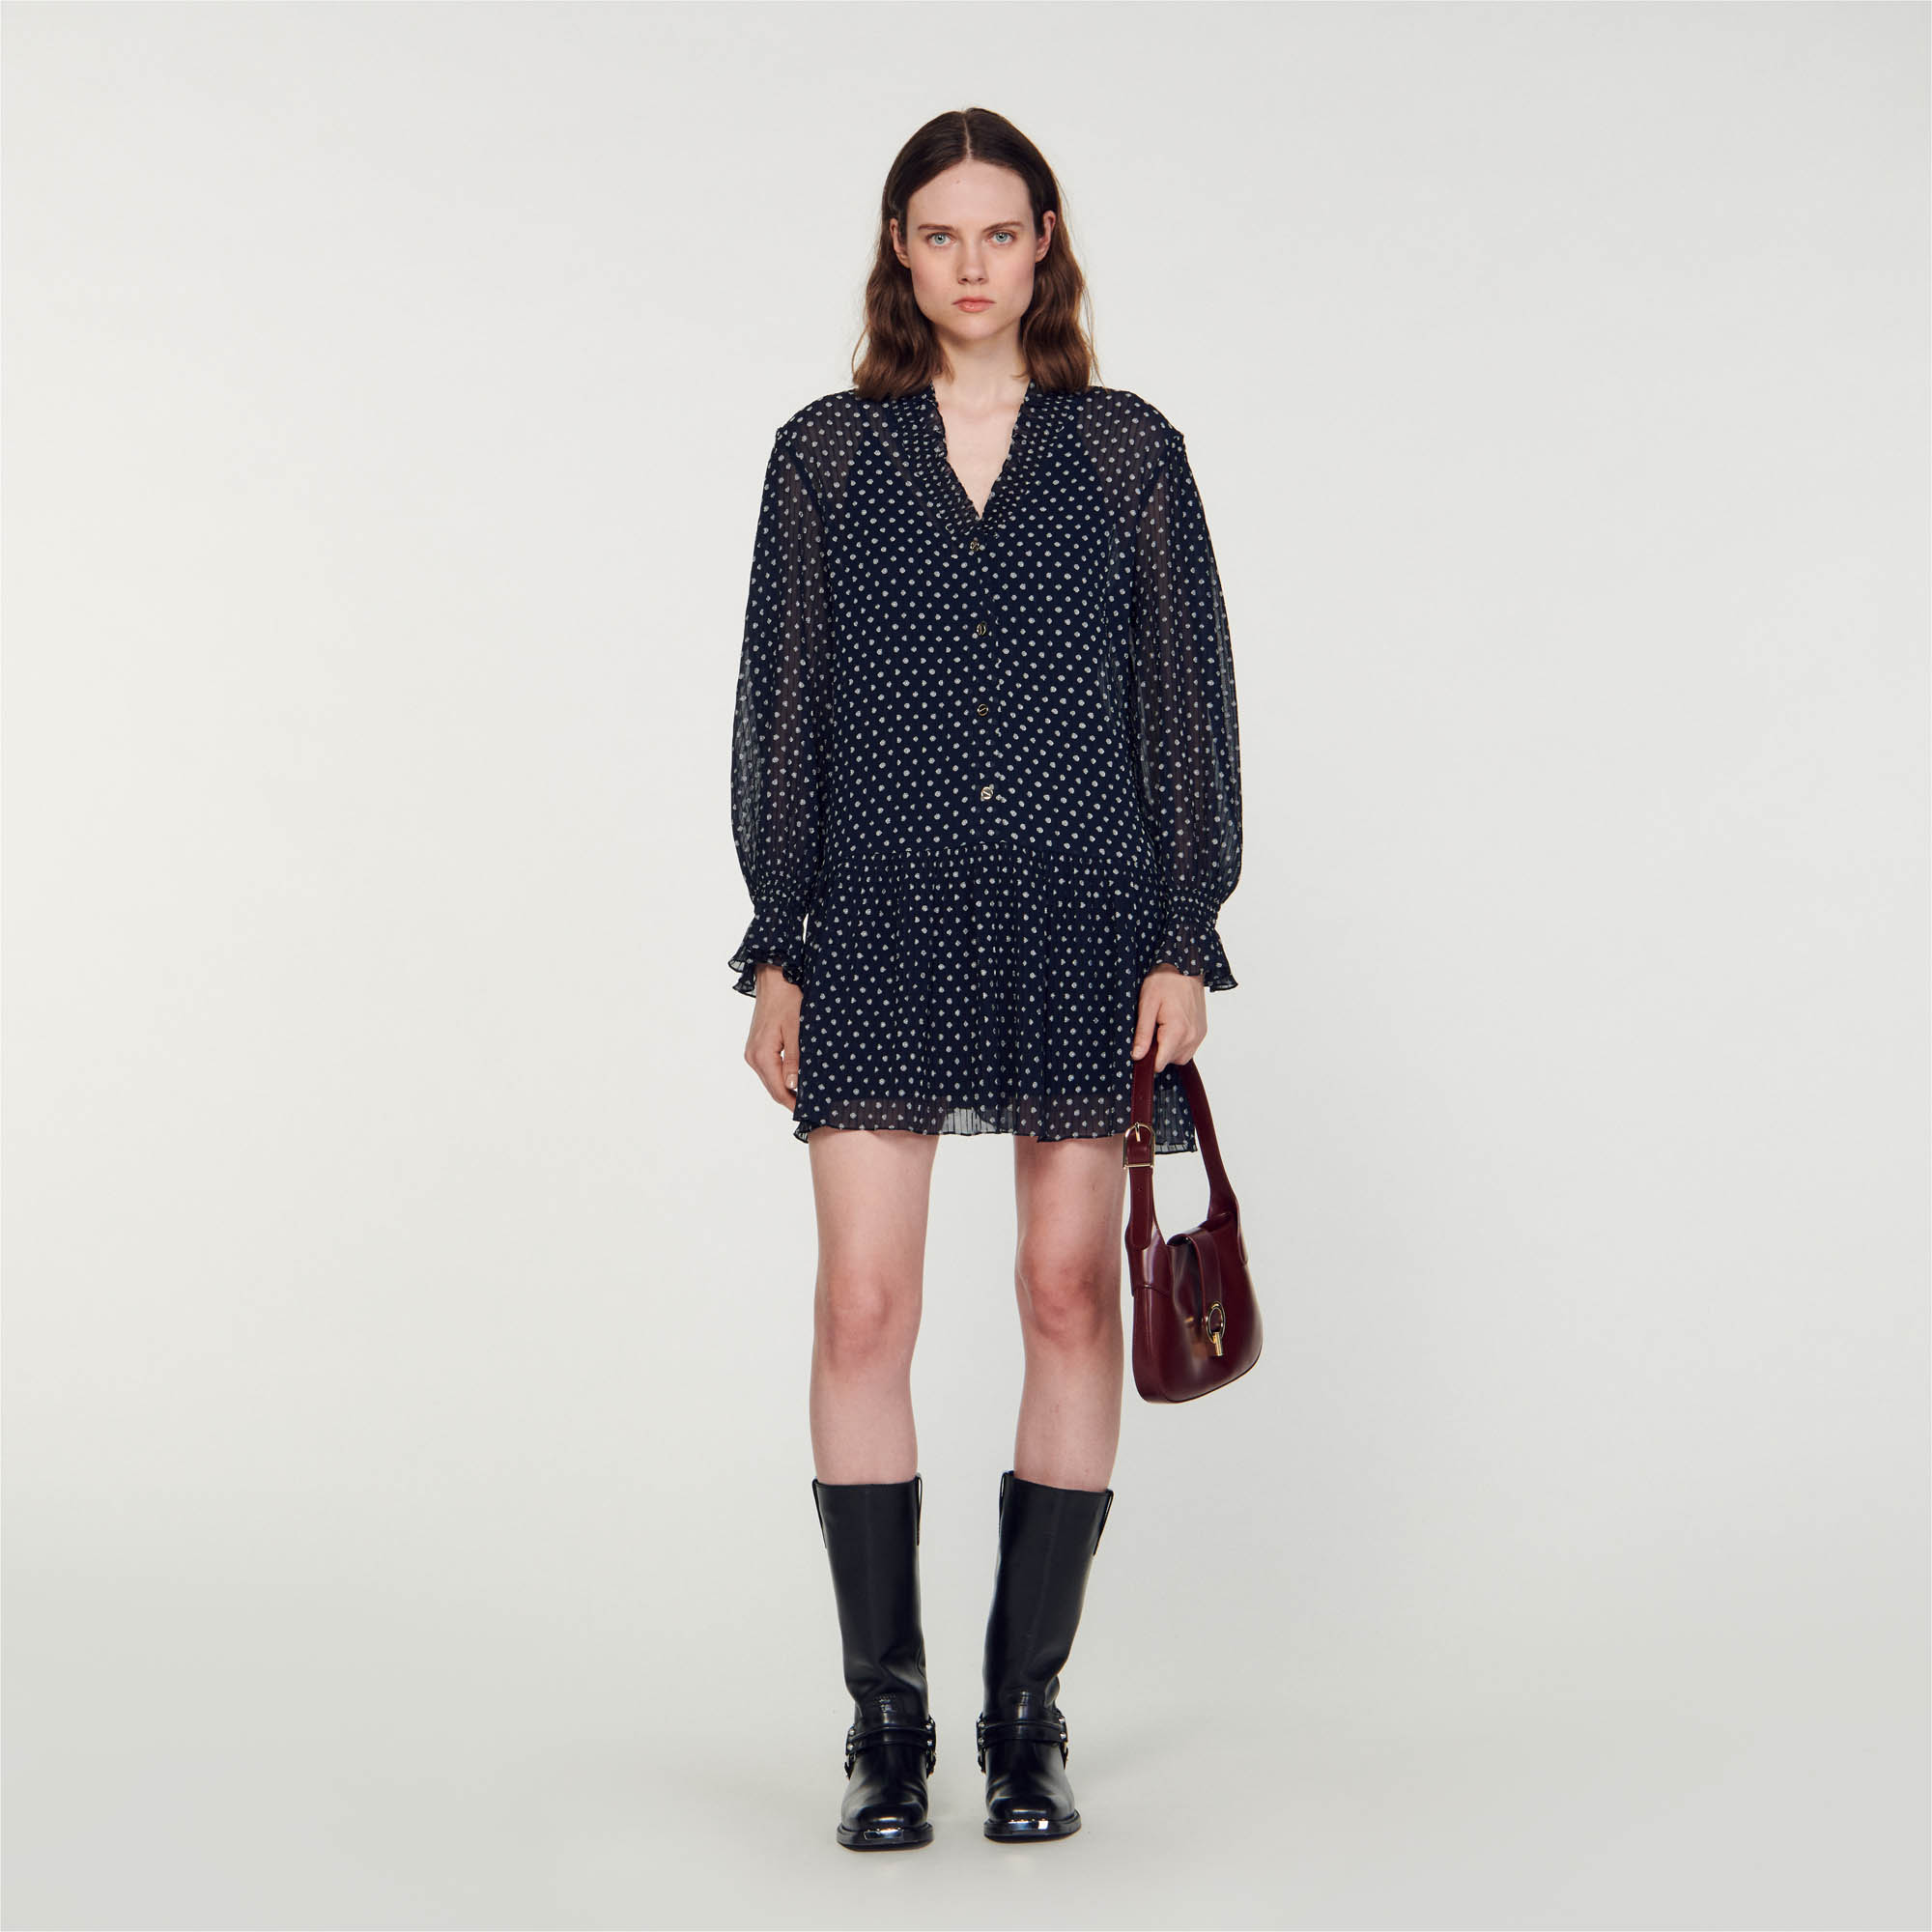 Sandro polyester Short voile dress embellished with polka-dot jacquard, featuring a V-neckline with smocked details, a button placket fastening with SANDRO-stamped buttons, voluminous long sleeves with frilly cuffs and a ruffled skirt